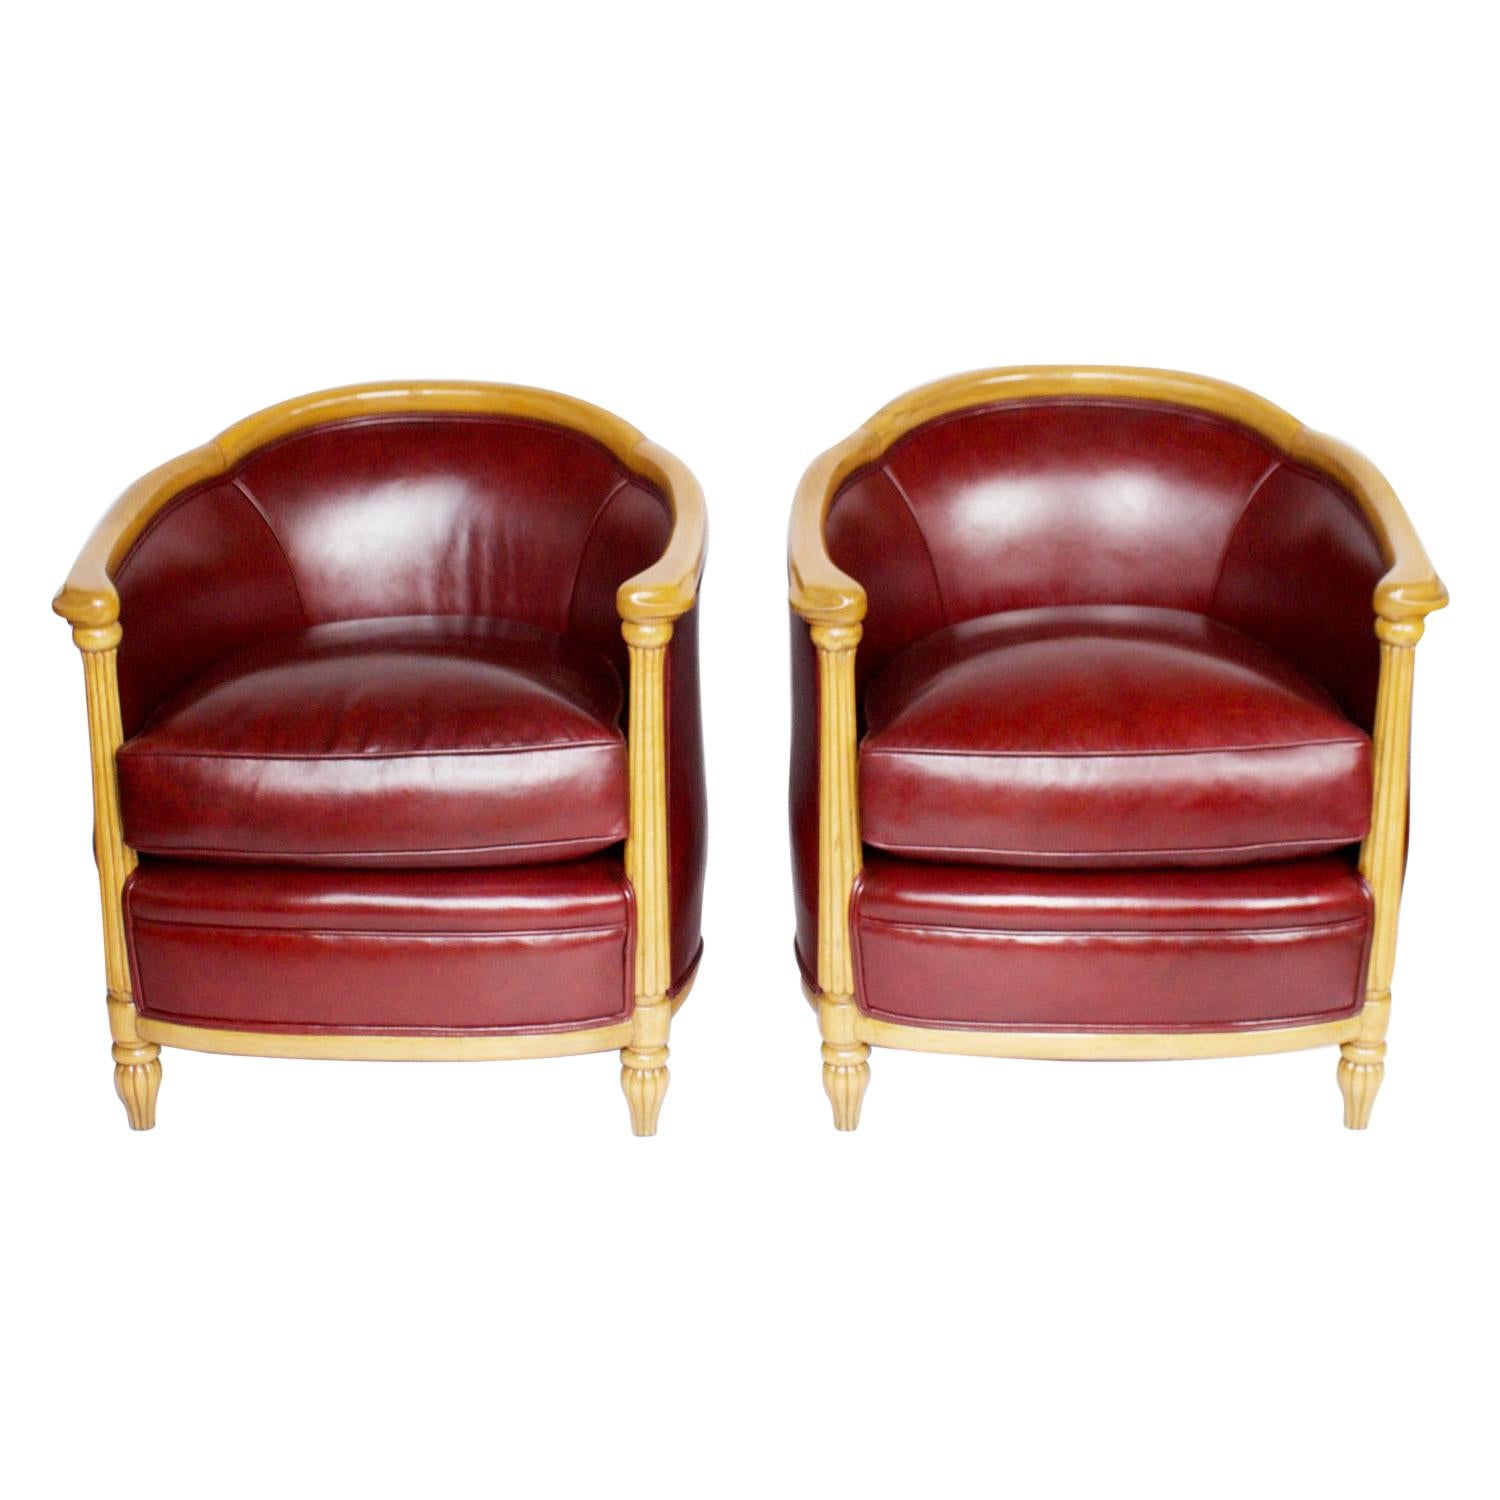 Art Deco Pair of Tub Chairs Upholstered in Red Leather, circa 1930